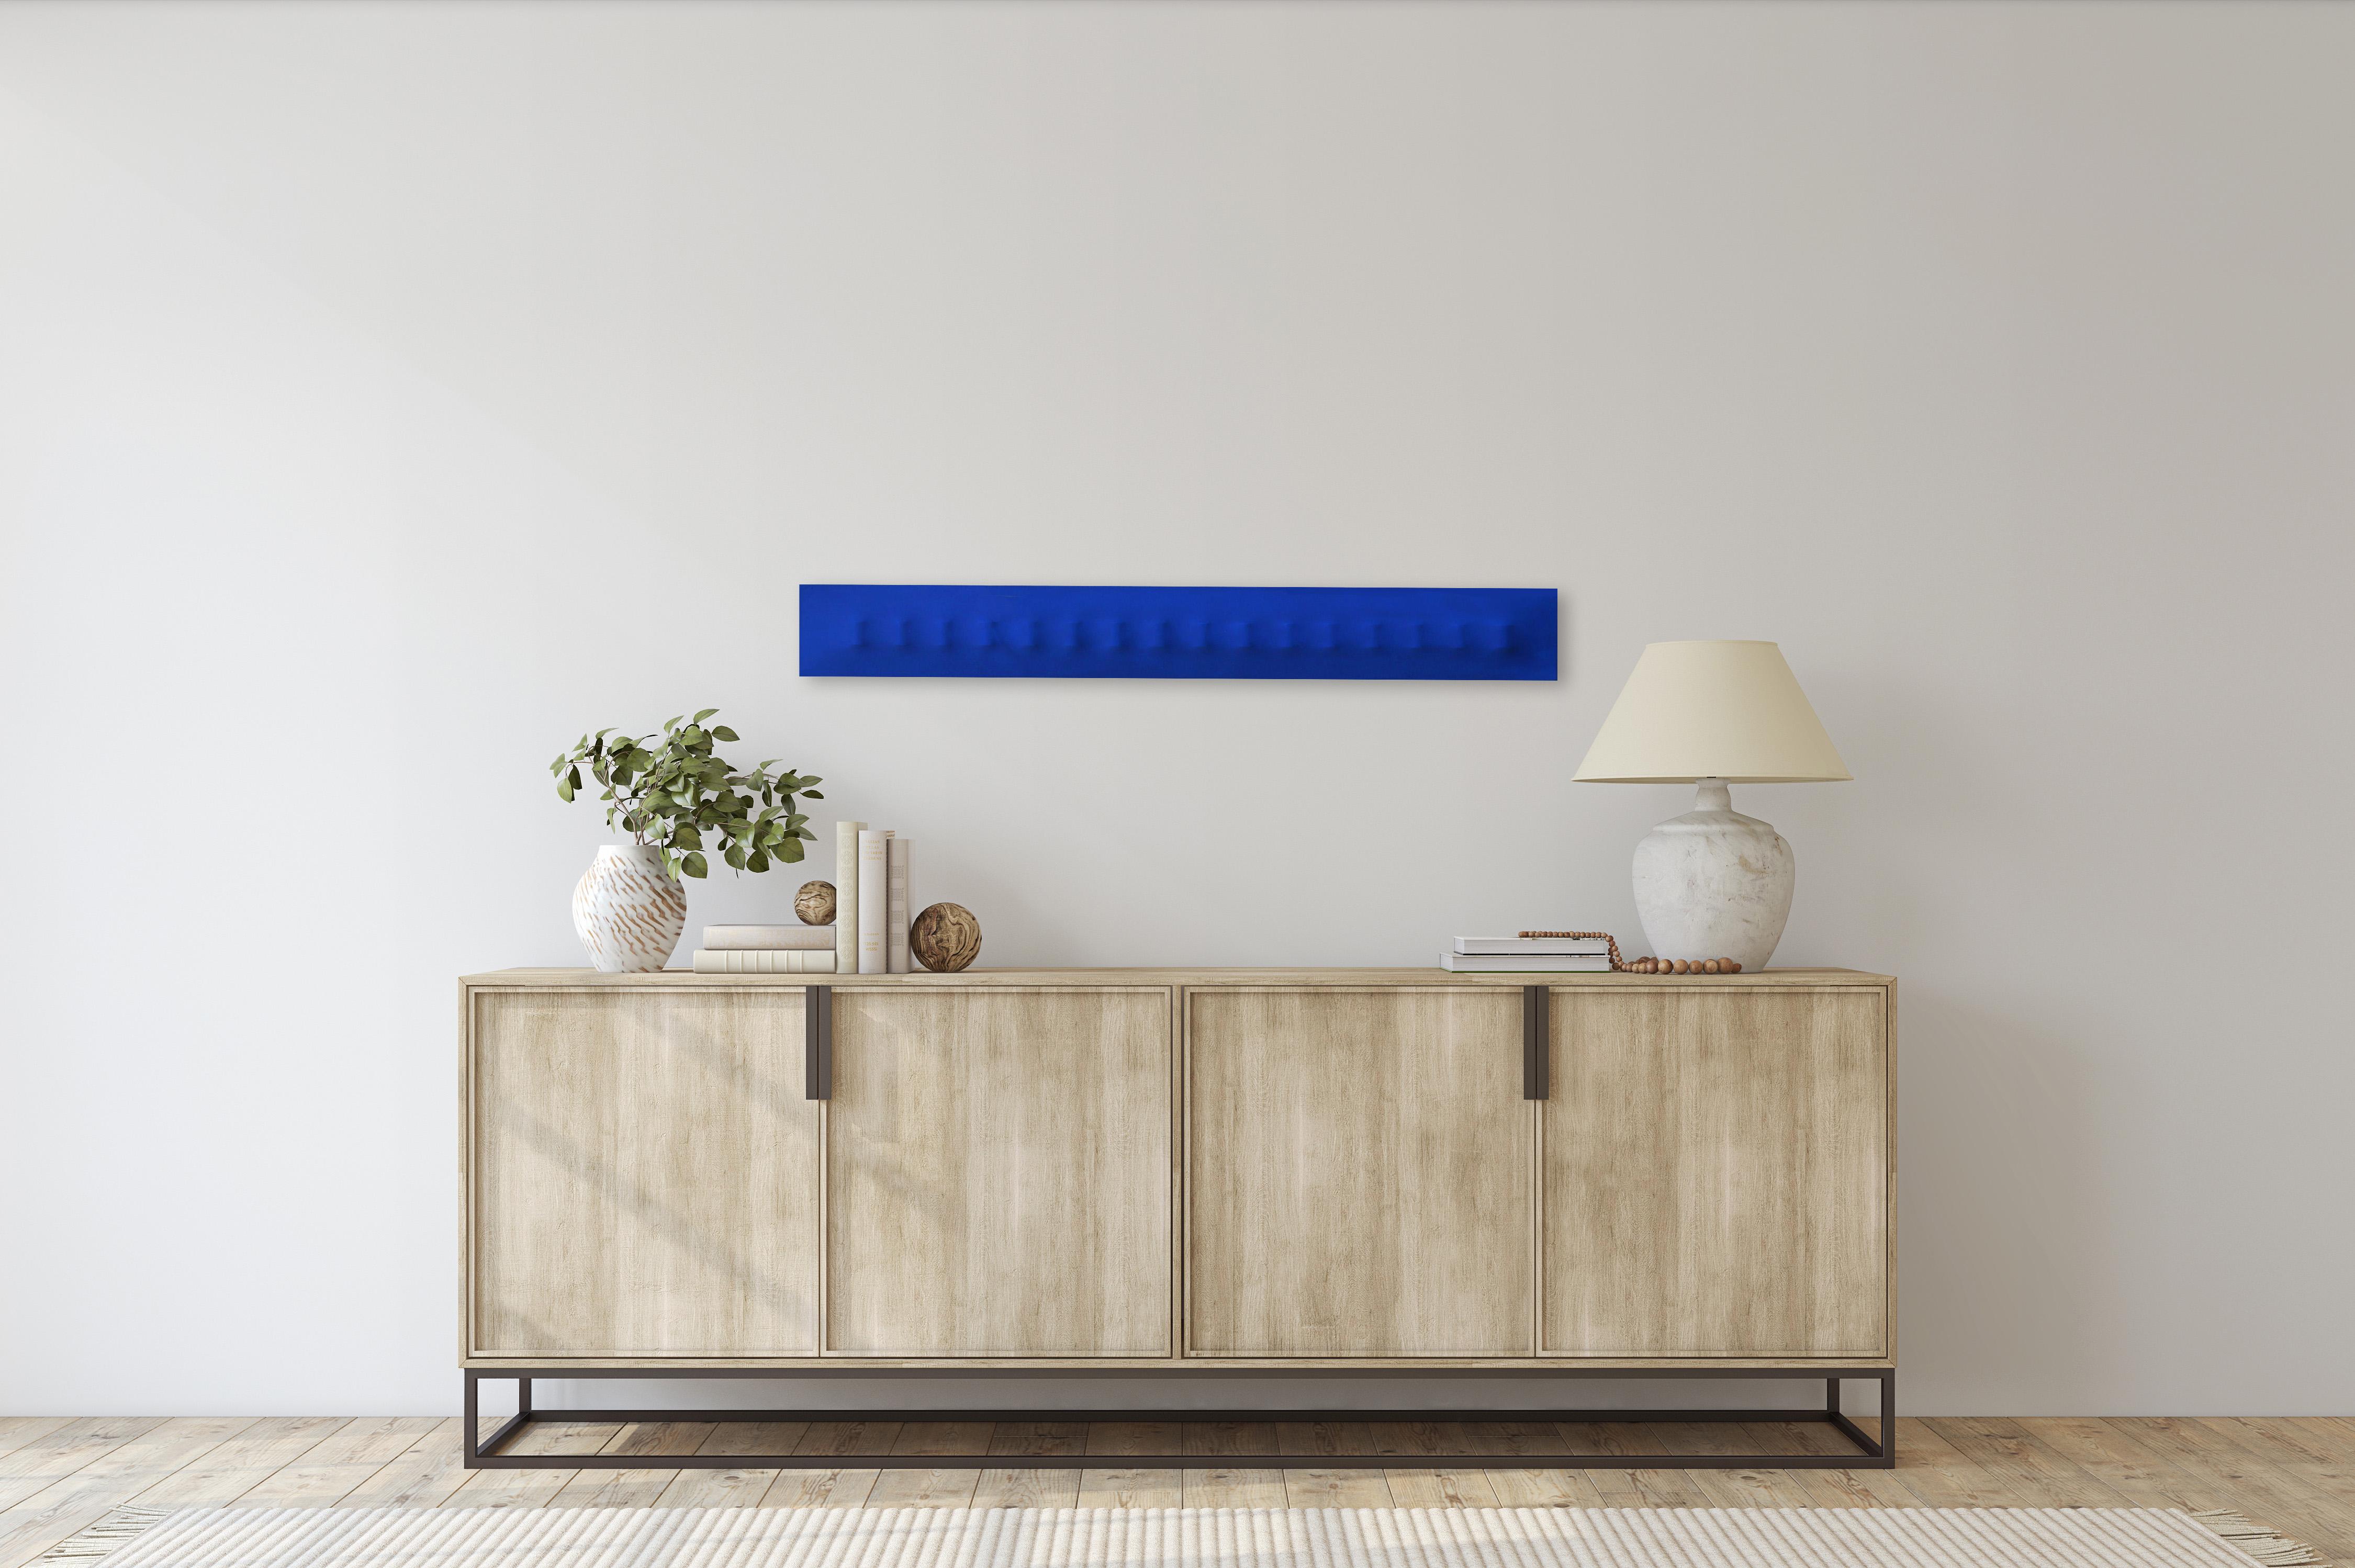 Slims CNB - Three-dimensional Minimalist Blue Abstract Wall Painting For Sale 4